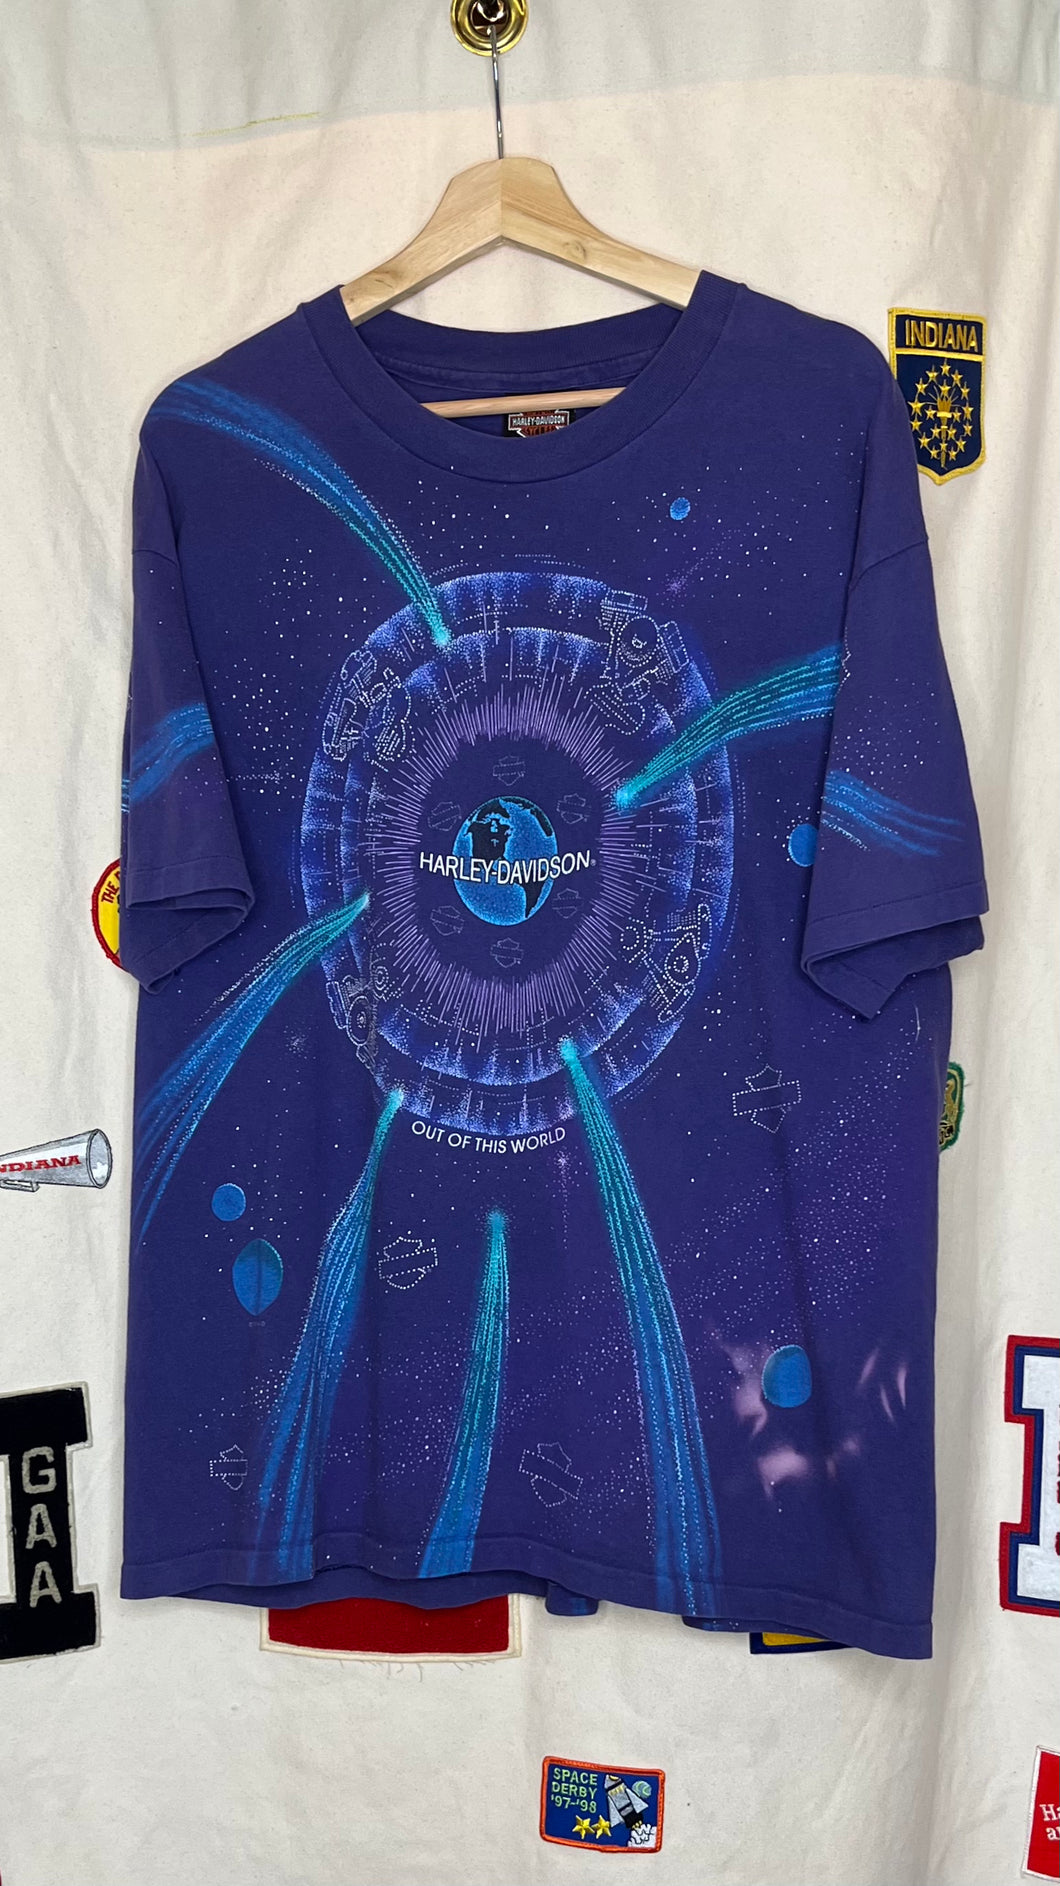 Harley-Davidson Out of this World Cosmic Galaxy Purple All-Over-Print T-Shirt: XL